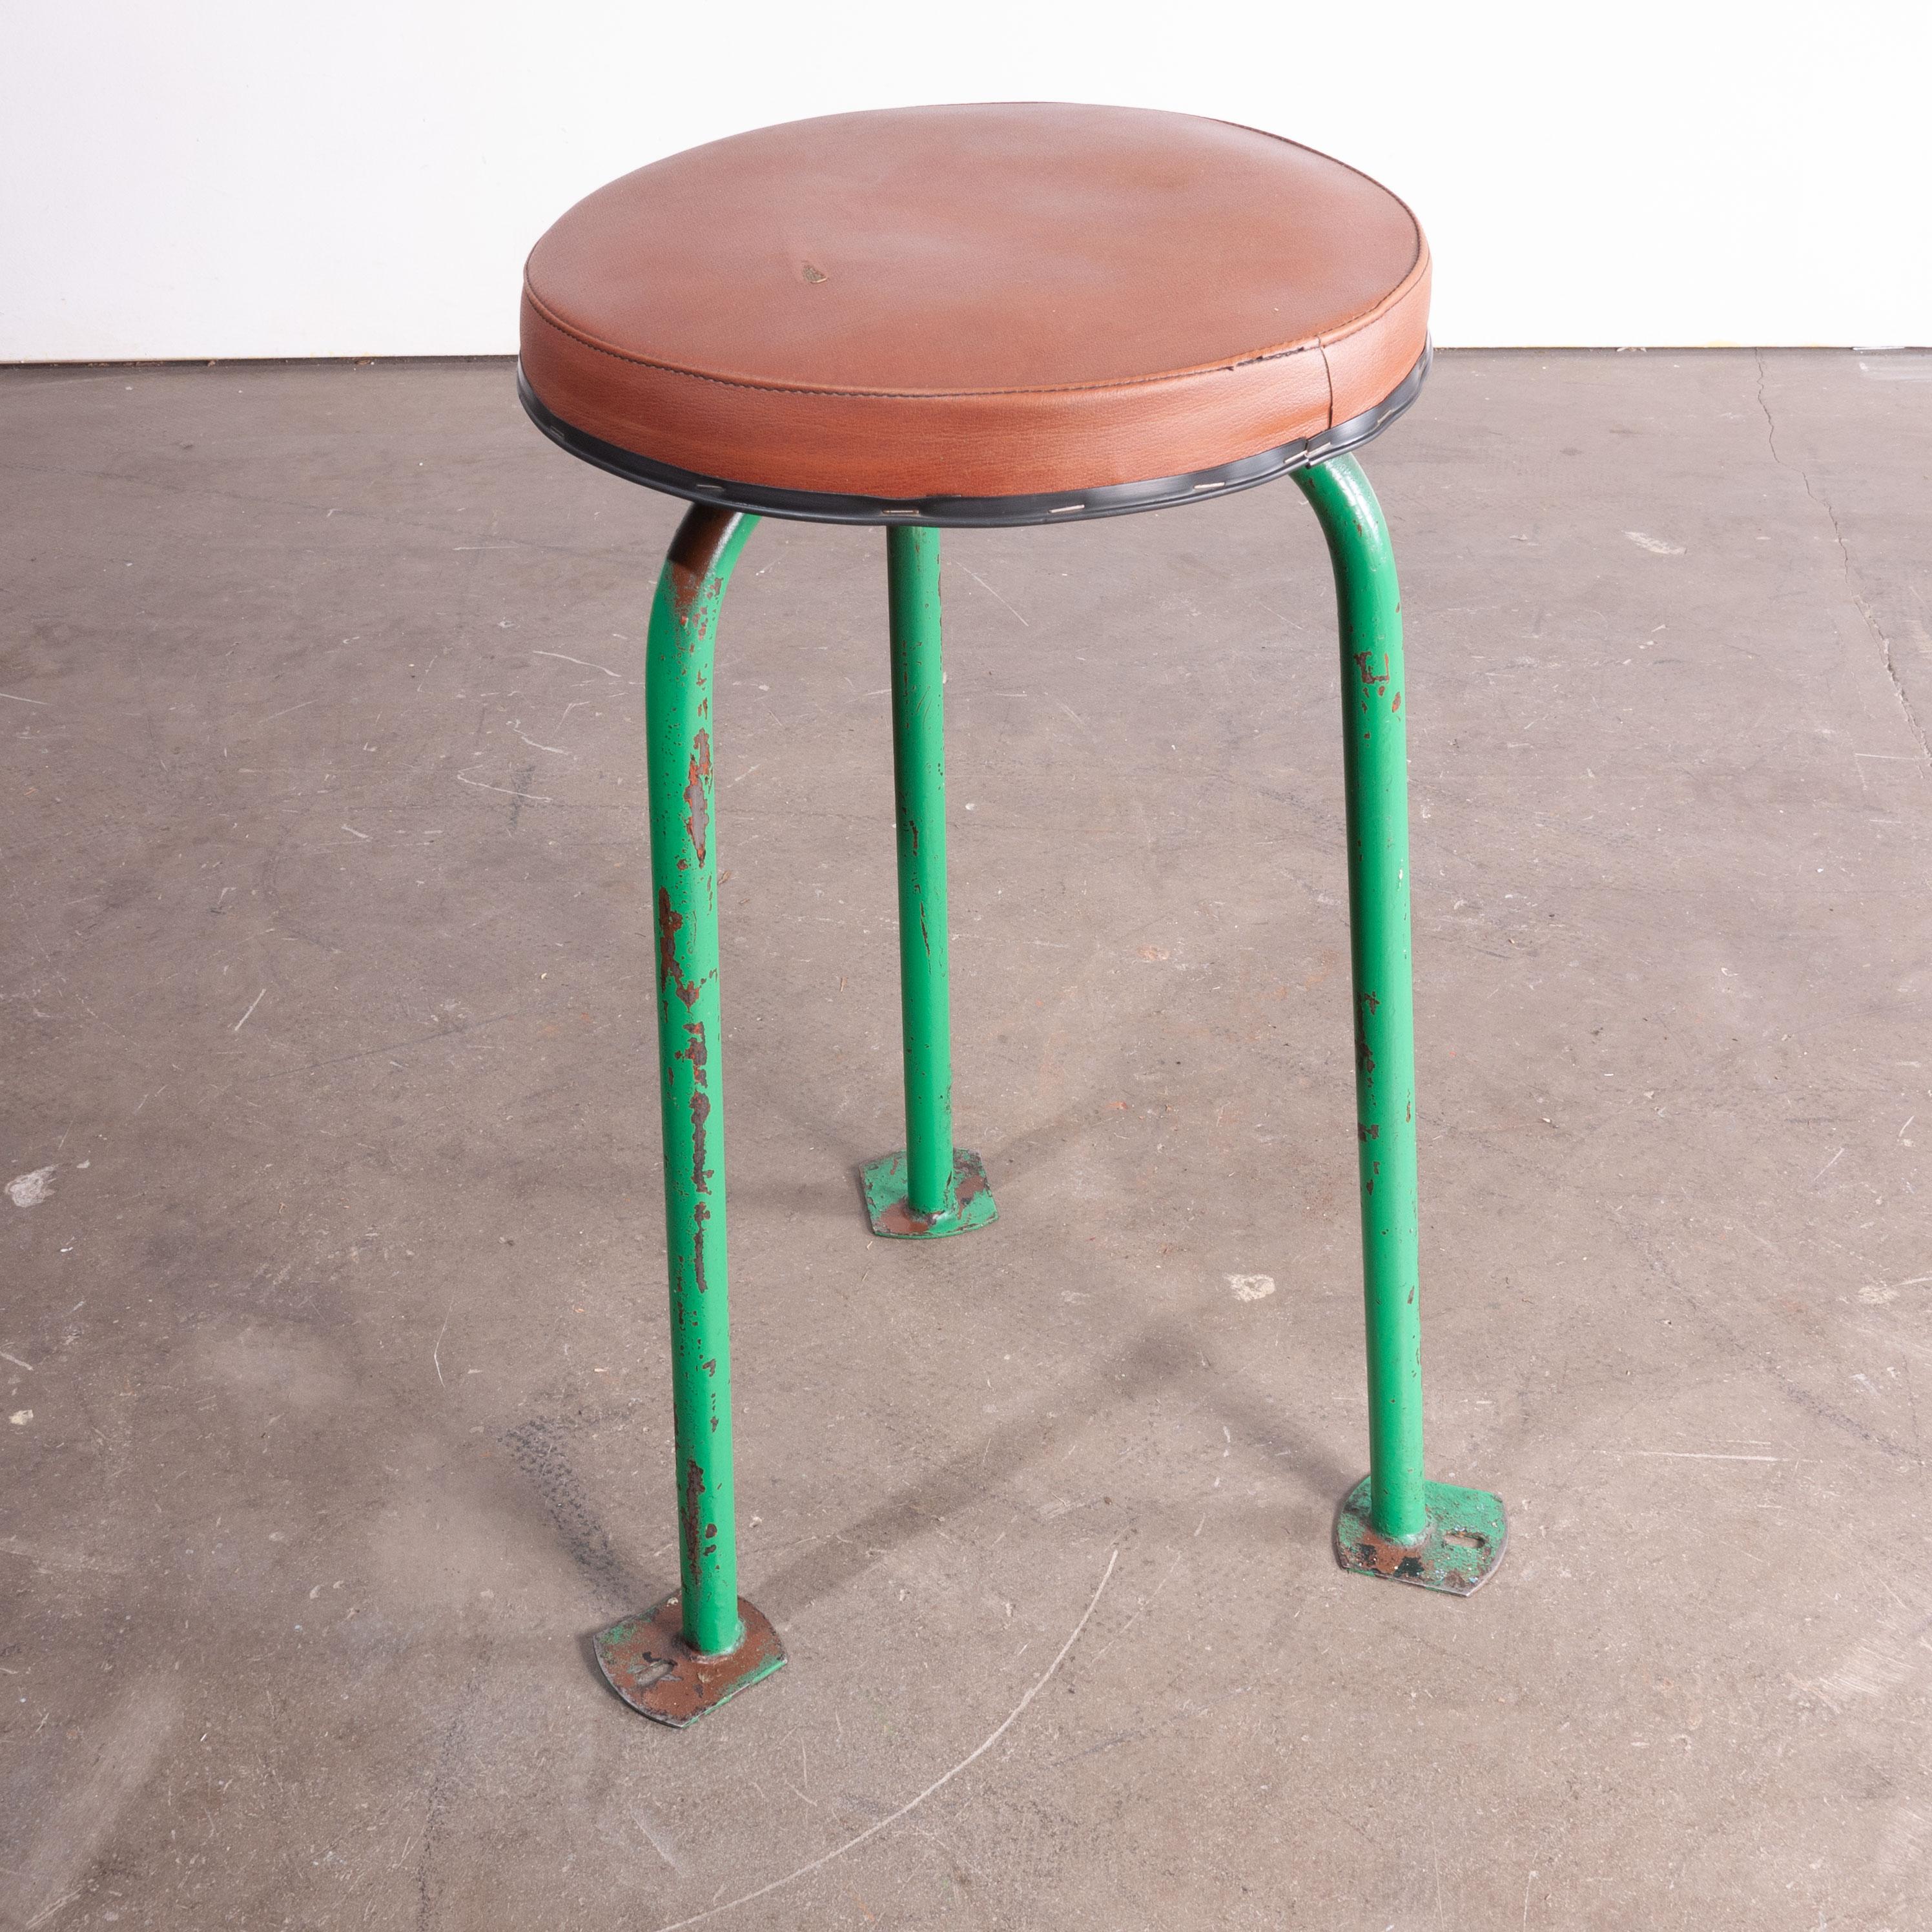 1960s set of three green 1960s Russian industrial stools
1950s vintage set of three 1960s Russian industrial stools. Three simple honest stools with original Rexine style upholstered and padded seats.

Workshop report
All of our vintage products